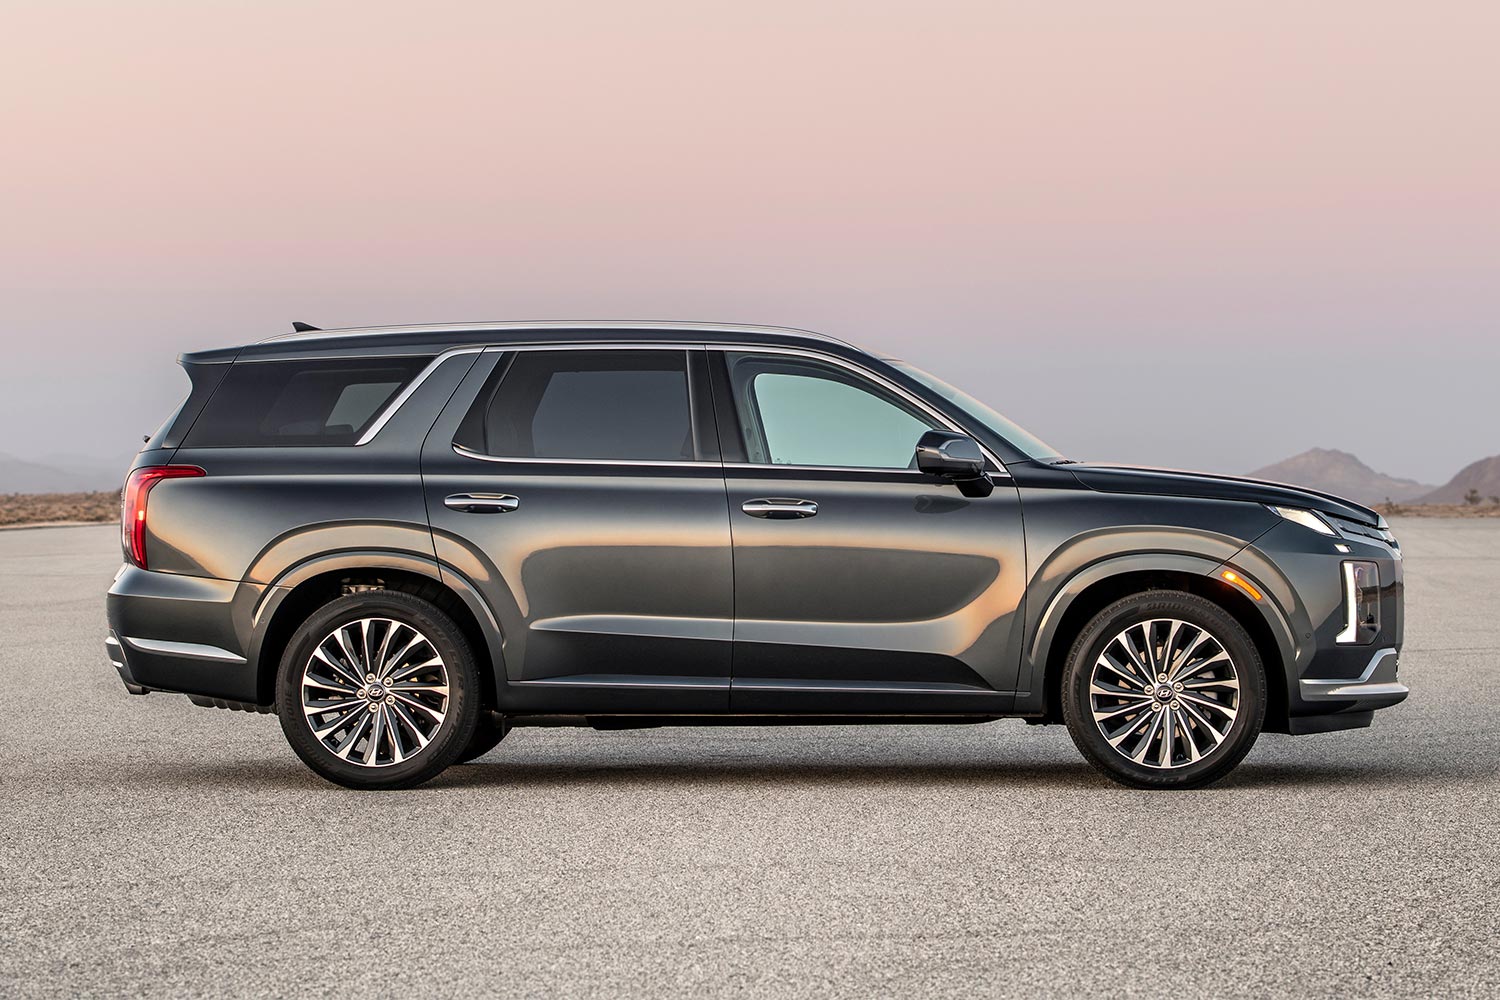 The profile of the 2023 Hyundai Palisade SUV, which we test drove and reviewed